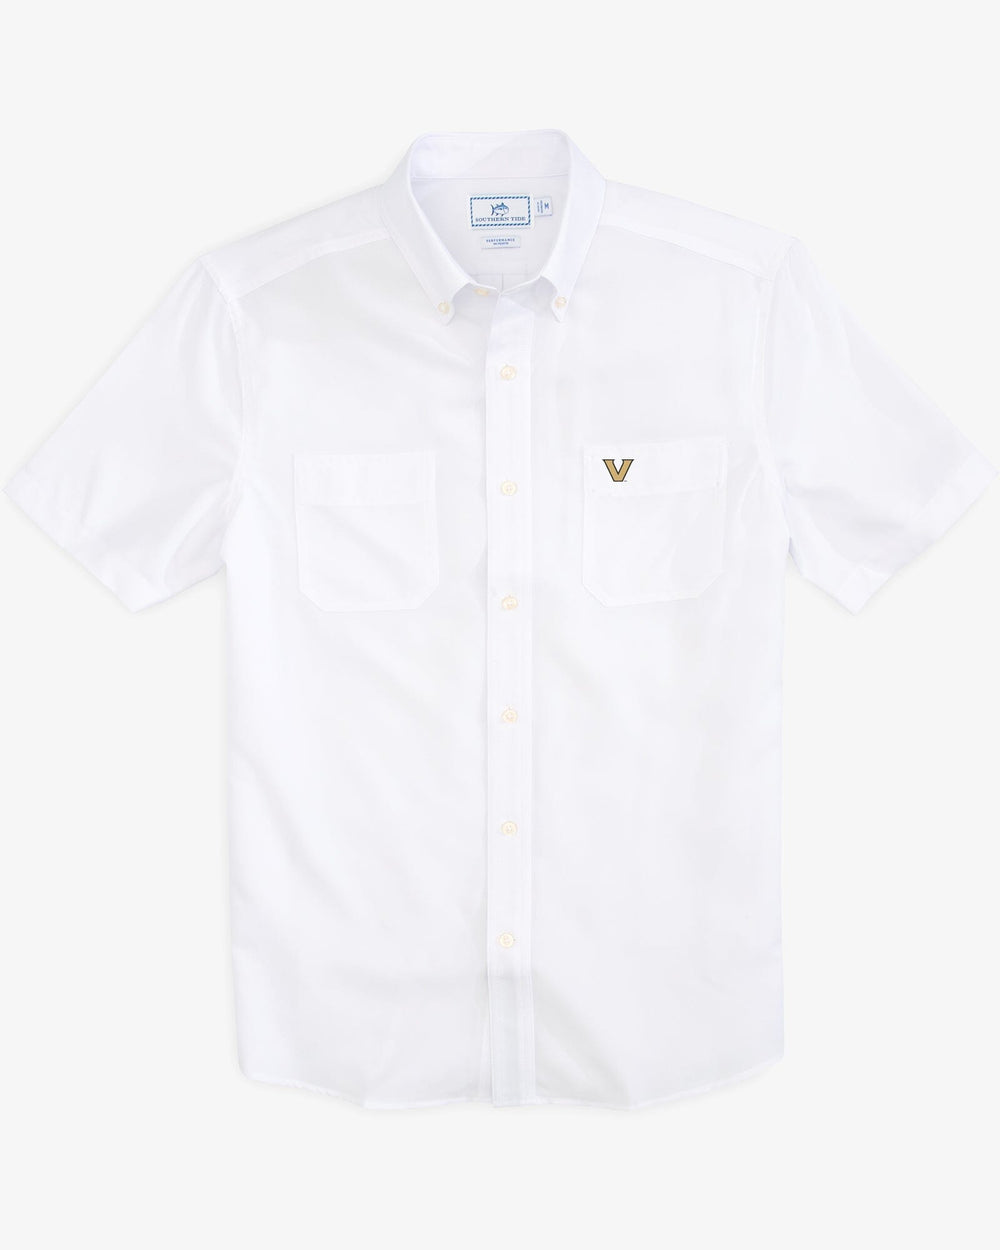 The front view of the Vanderbilt Commodores Short Sleeve Button Down Dock Shirt by Southern Tide - Classic White